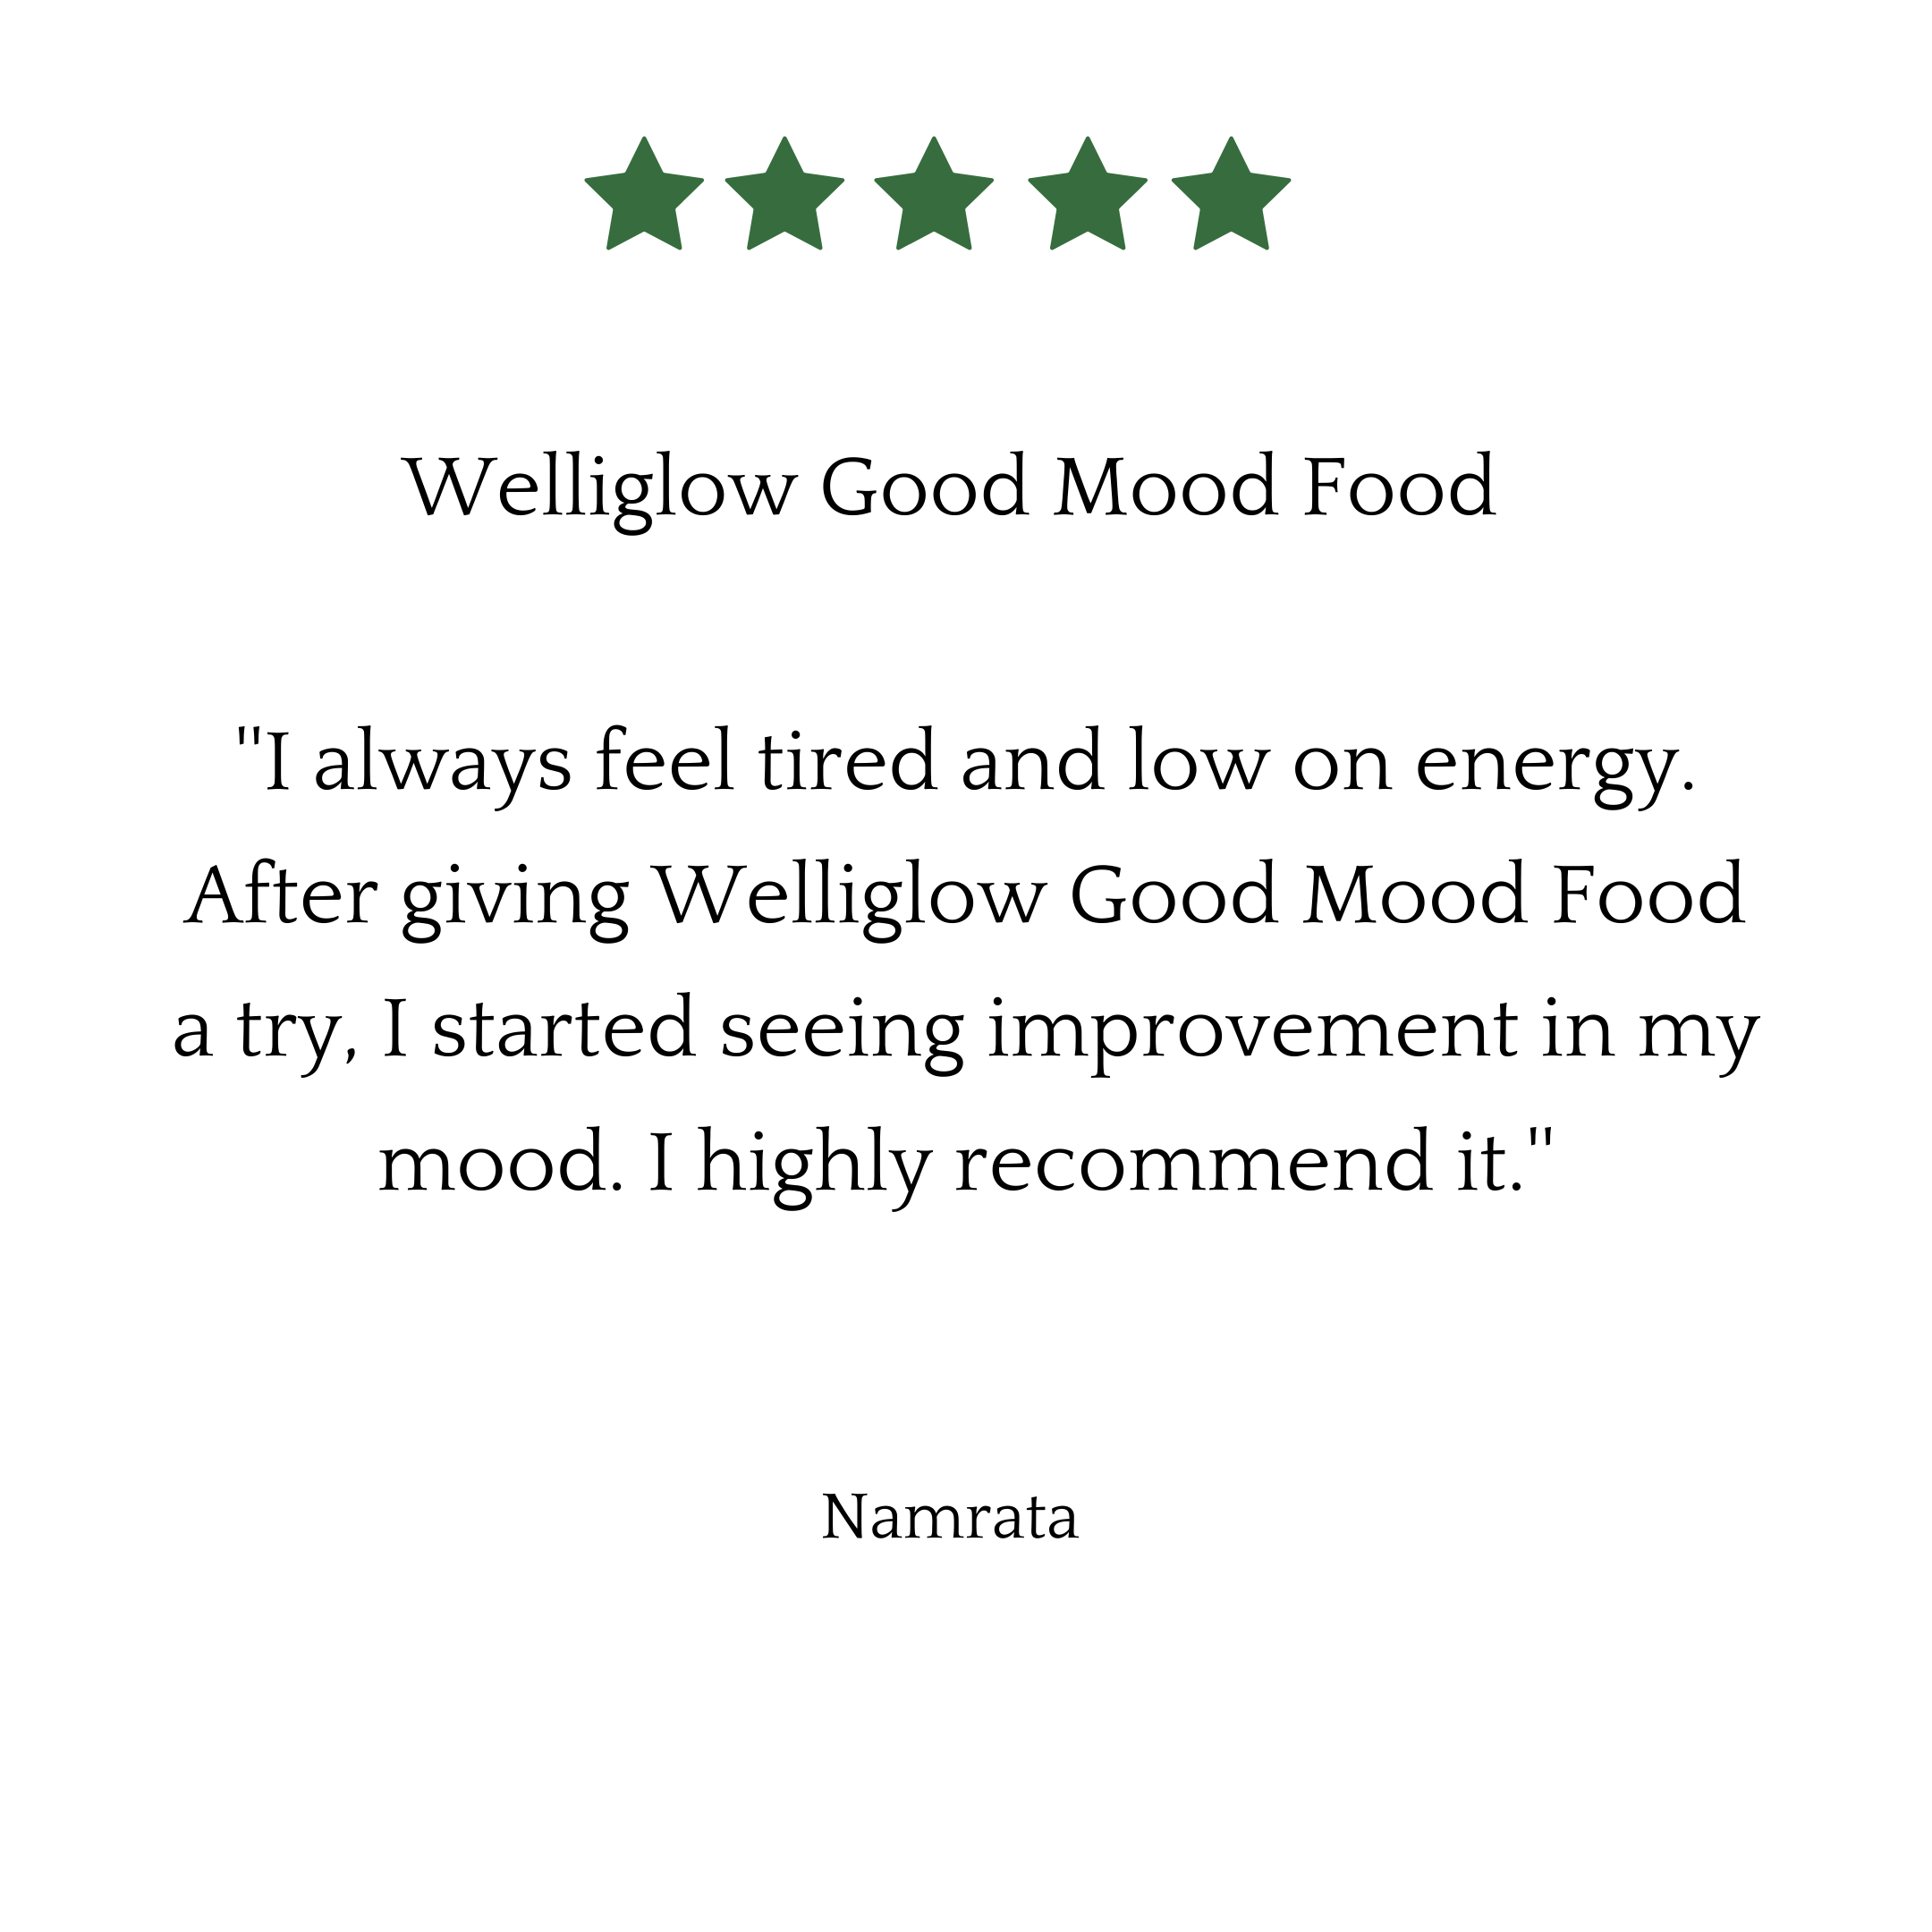 welliglow good mood food review